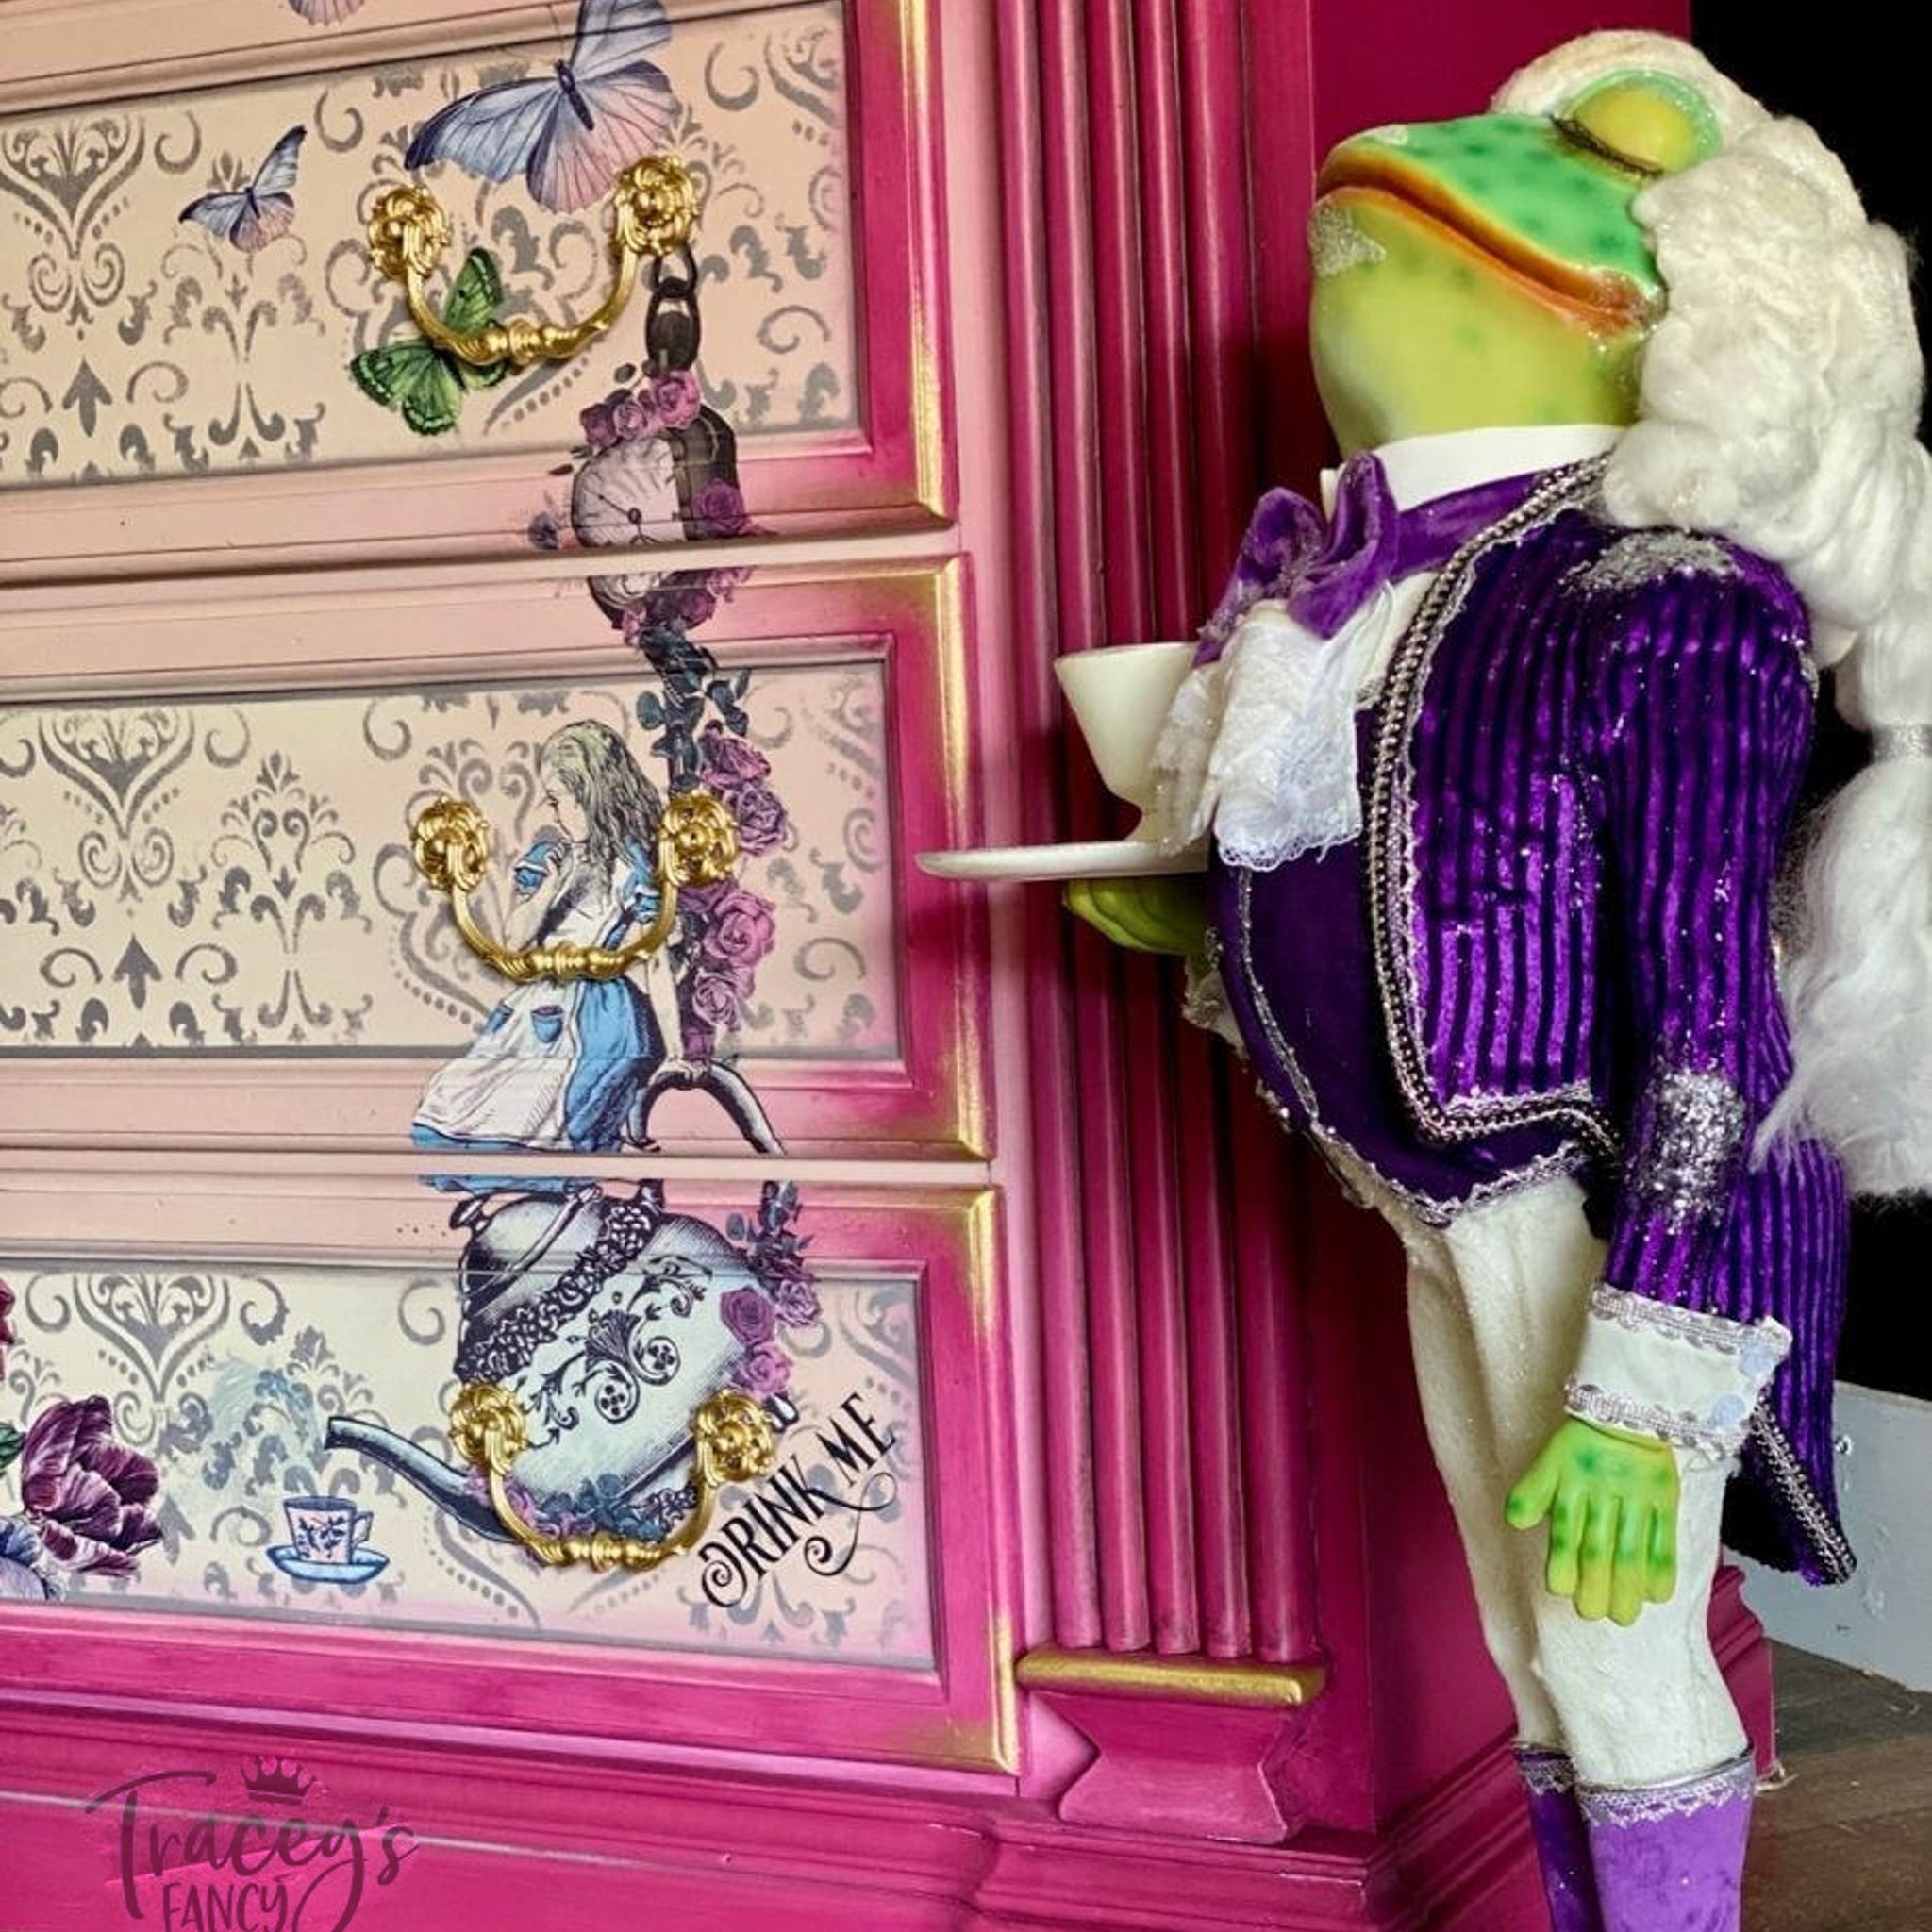 A close-up of a dresser refurbished by Trancey's Fancy is painted light pink and dark pink with gold accents features parts of the Alice Part 2 transfer. A statue of a frog waiter in a white wig and purple coat and vest stands next to the dresser.